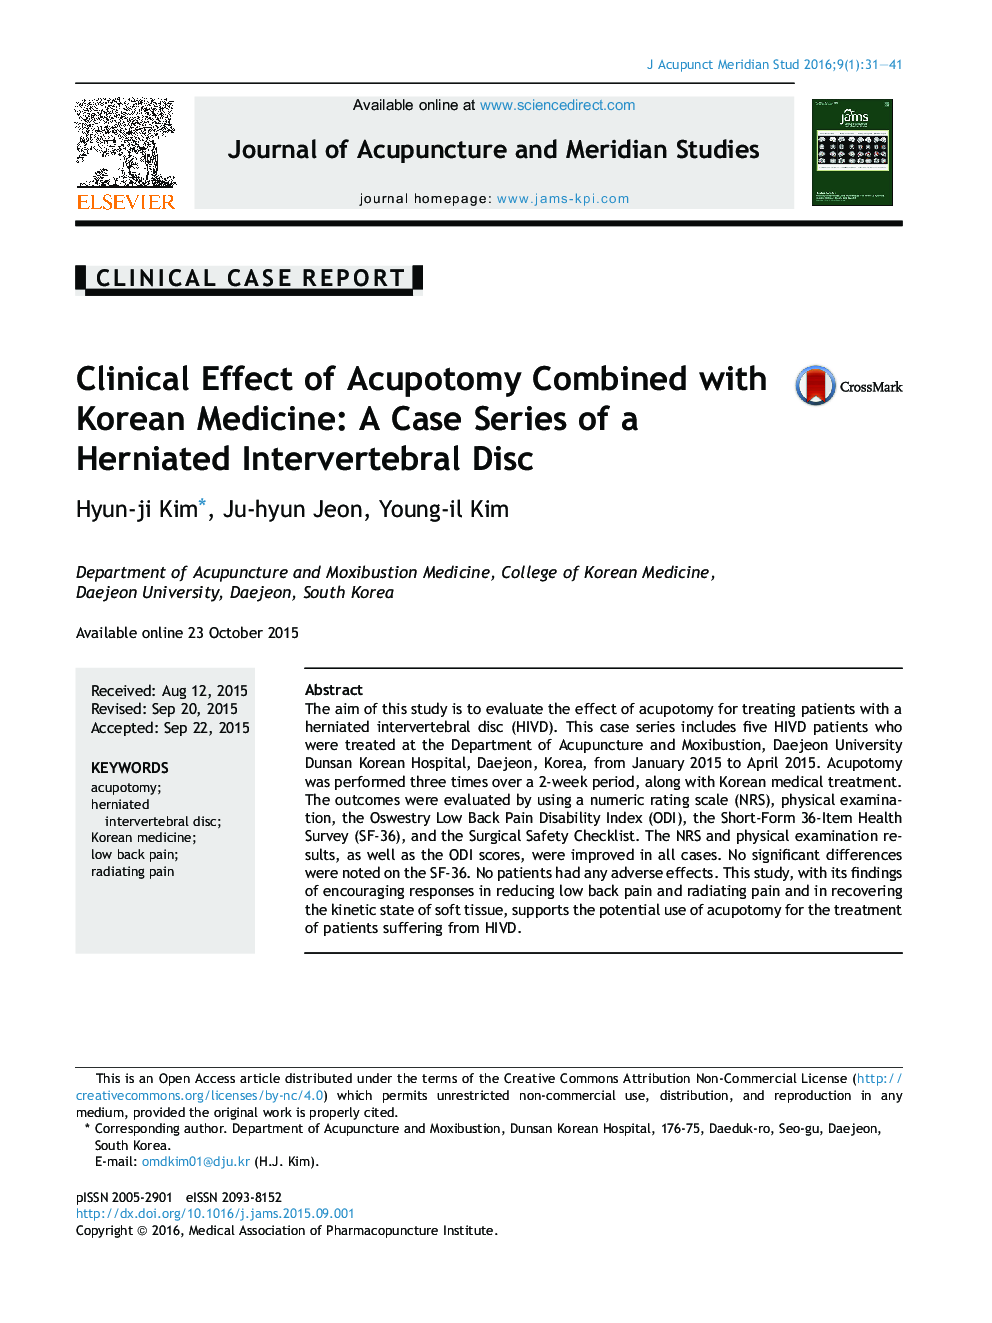 Clinical Effect of Acupotomy Combined with Korean Medicine: A Case Series of a Herniated Intervertebral Disc 